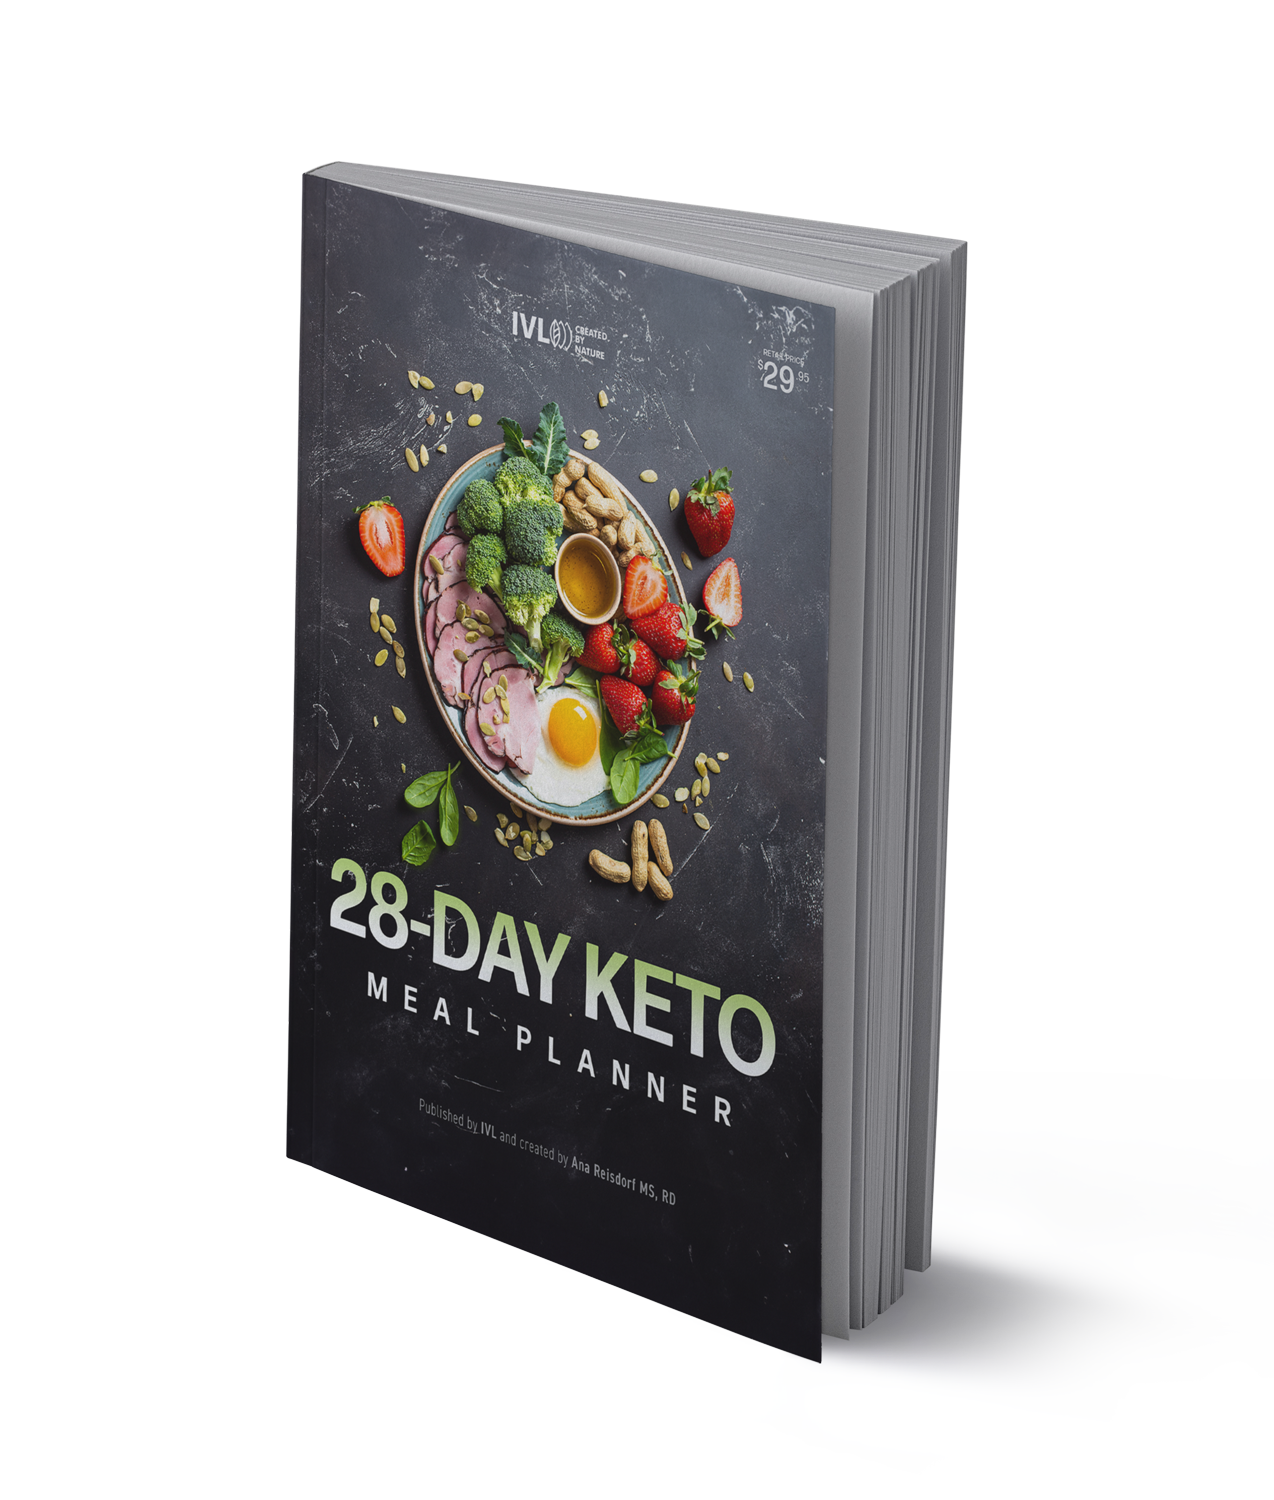 28-Day Keto Meal Planner